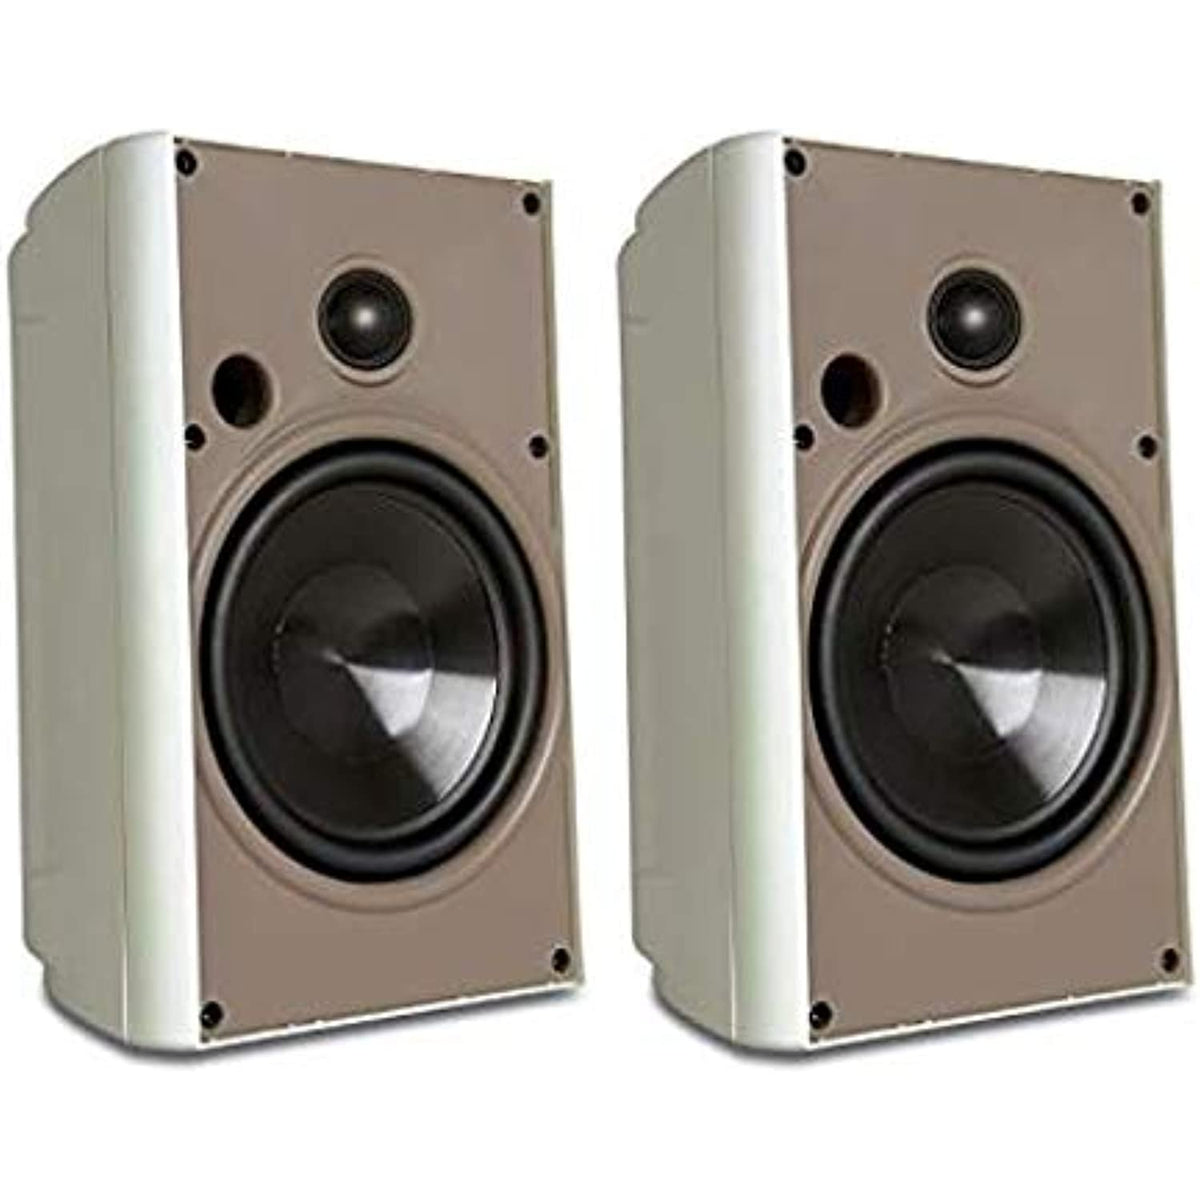 Proficient Audio Systems AW650WHT 6.5-Inch Indoor/Outdoor Speakers (White)